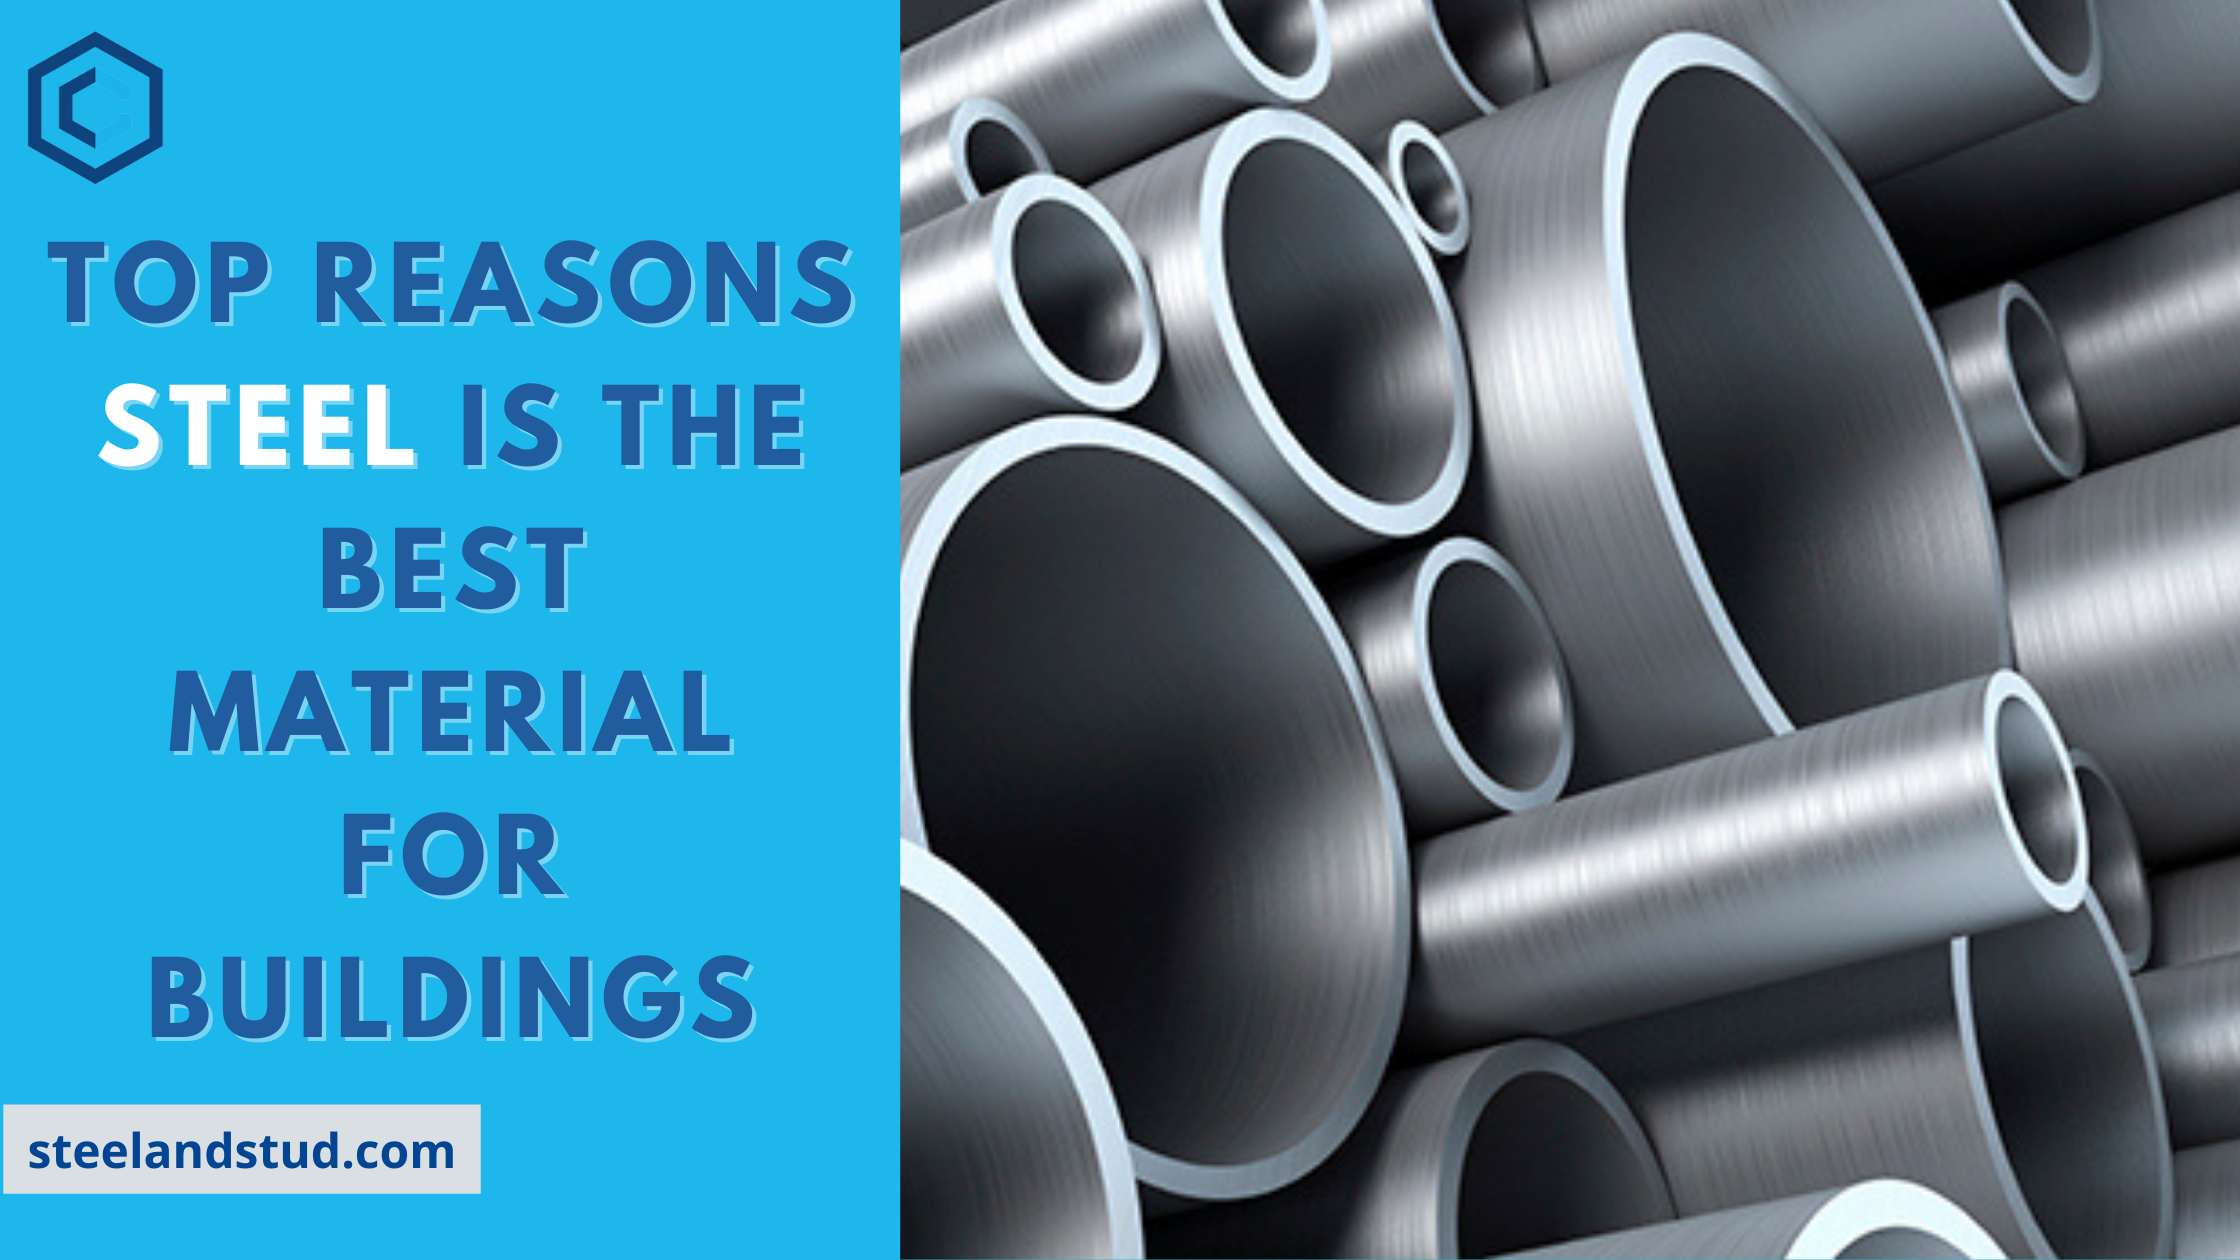 Top Reasons Steel is the Best Material for Buildings